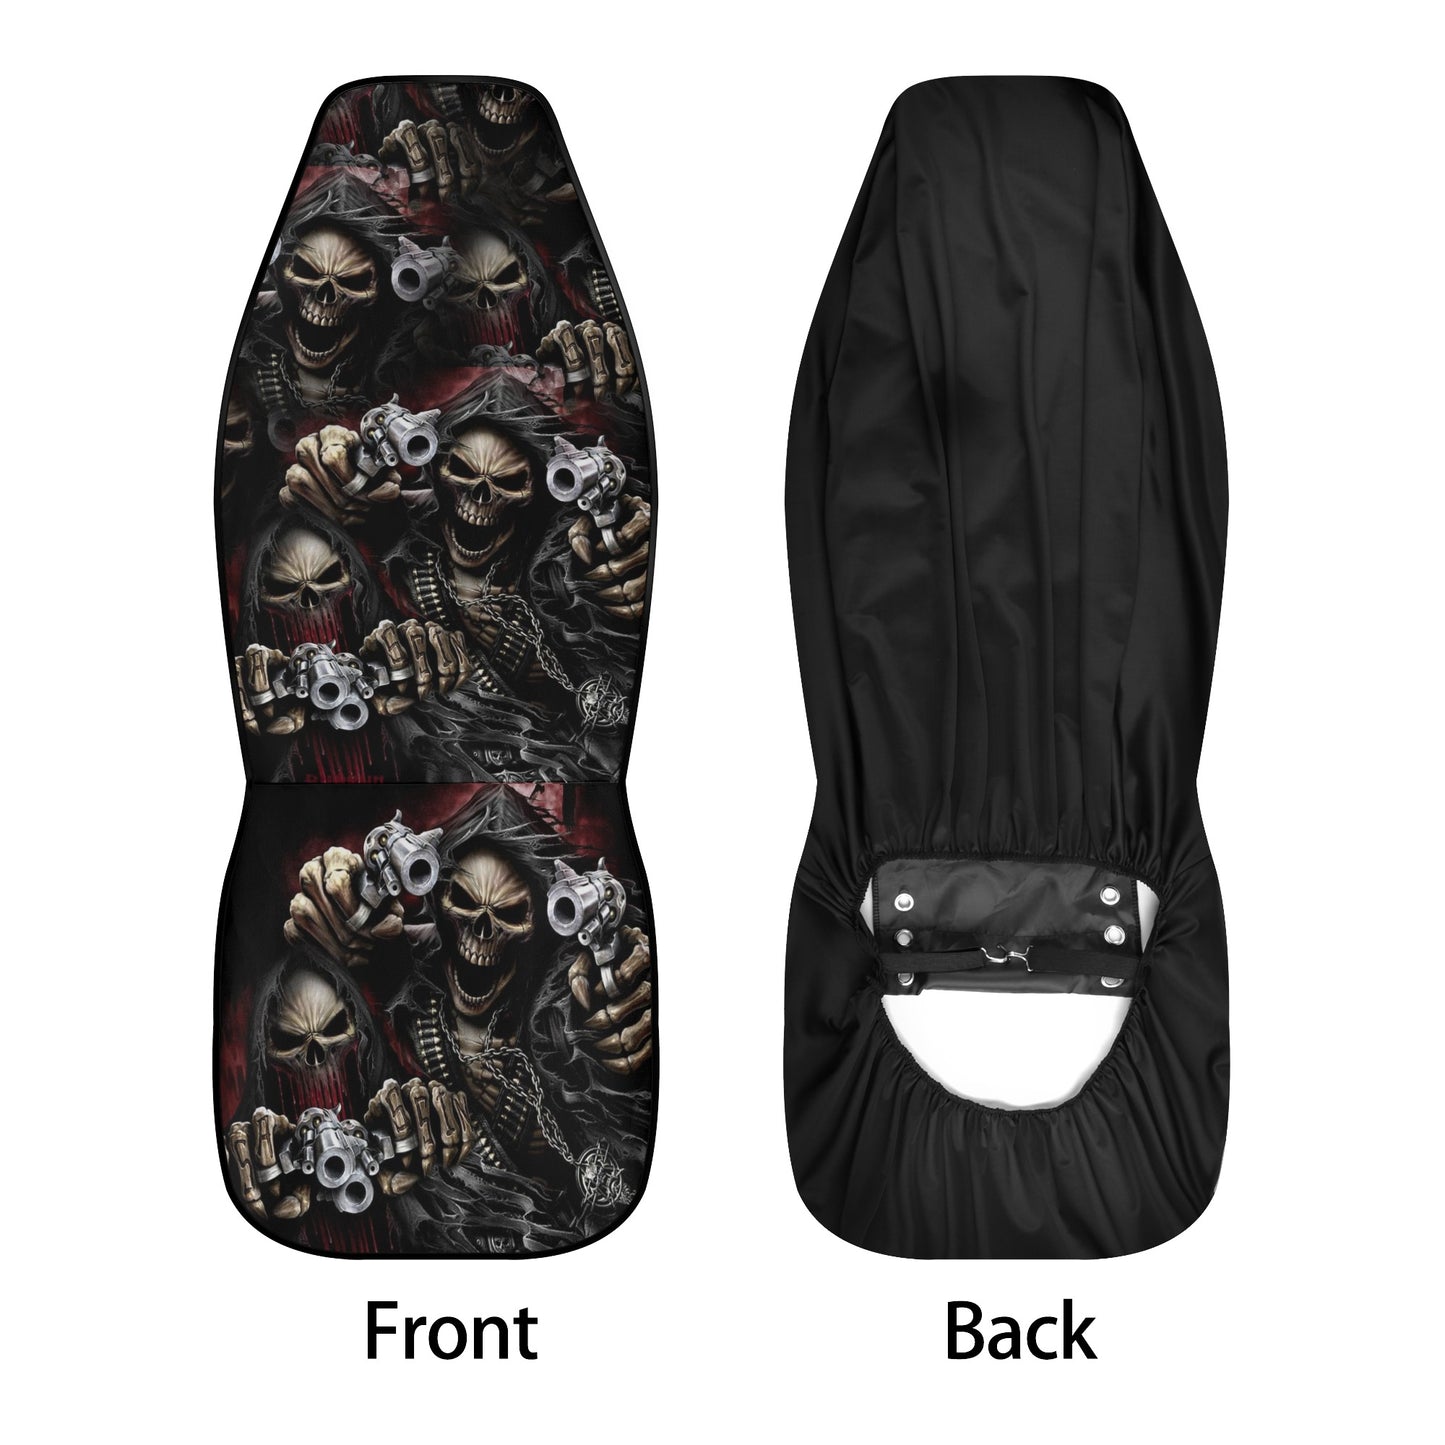 Skull seat cover for car, rose skull cover cushion accessories for Cars, horror washable car seat covers, horror mat for car, floral skull r